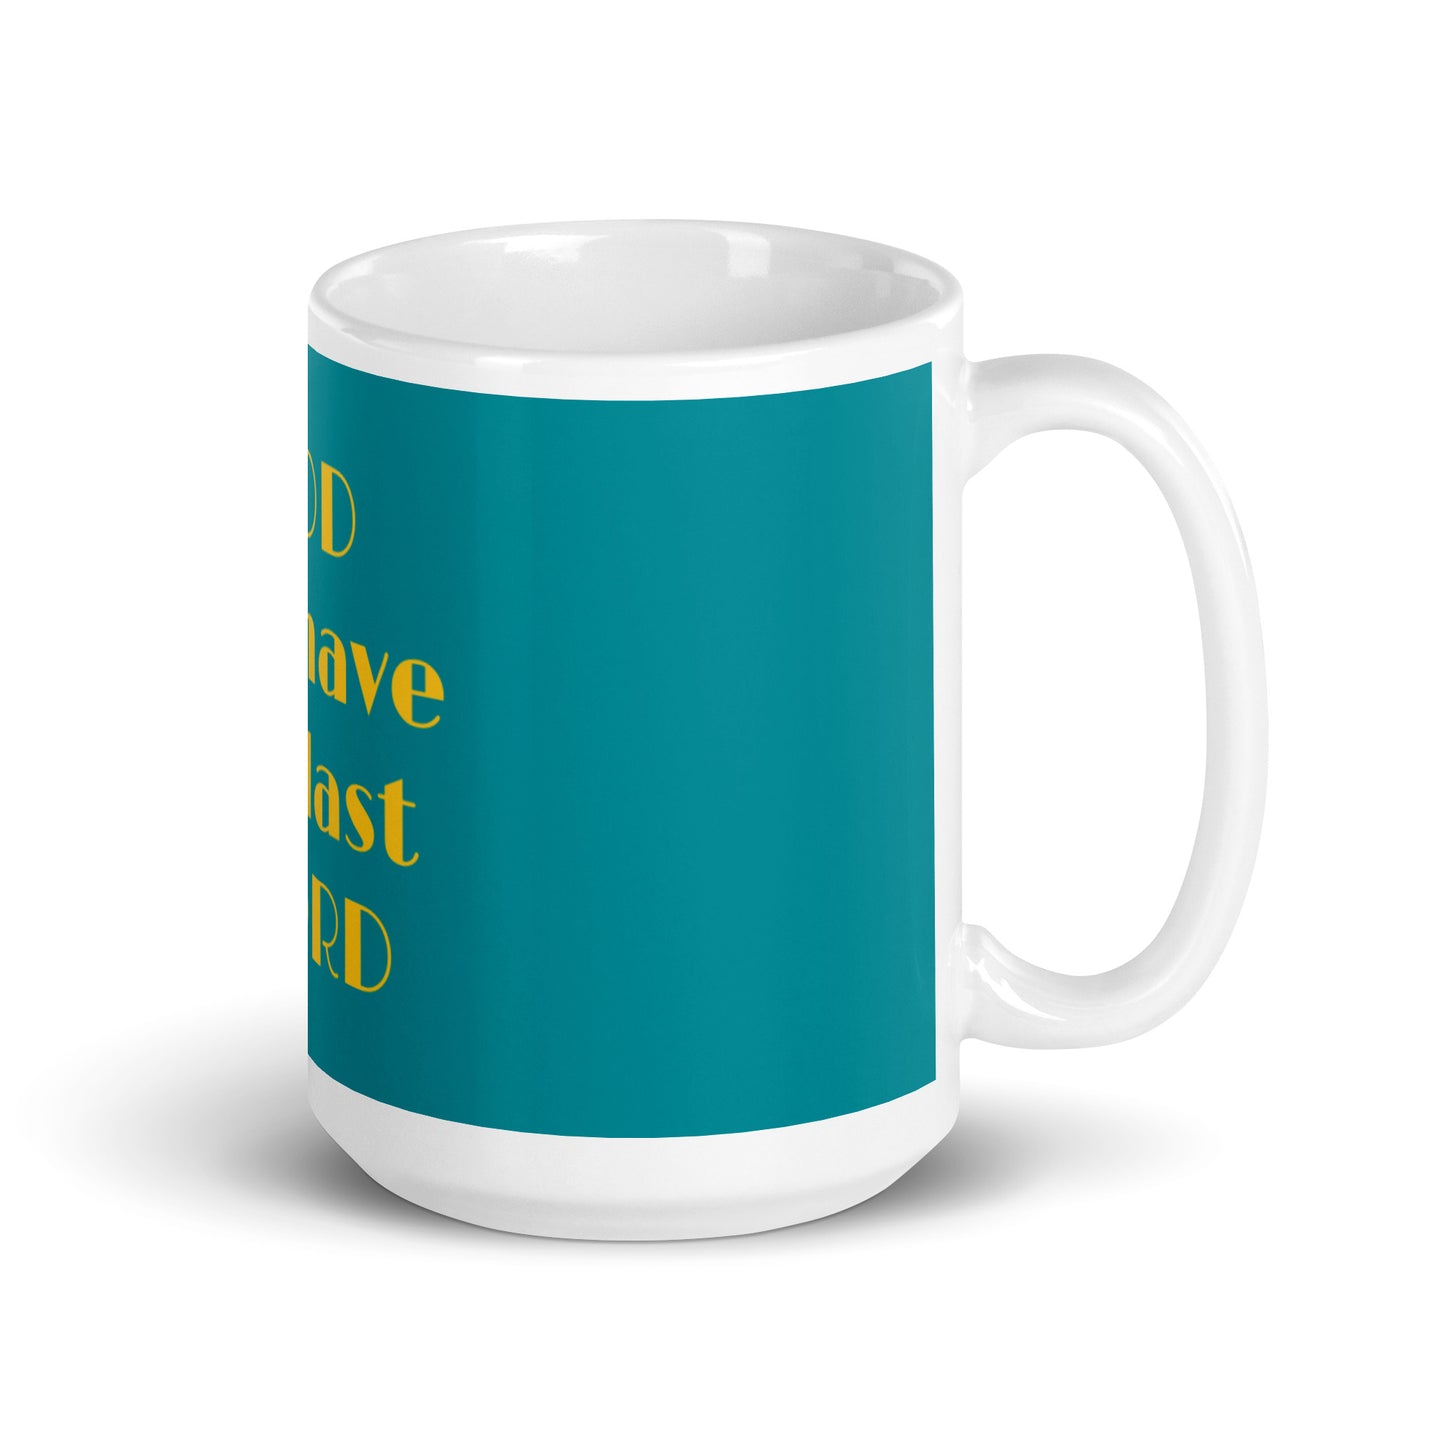 Teal White Glossy Mug - God will have the last word